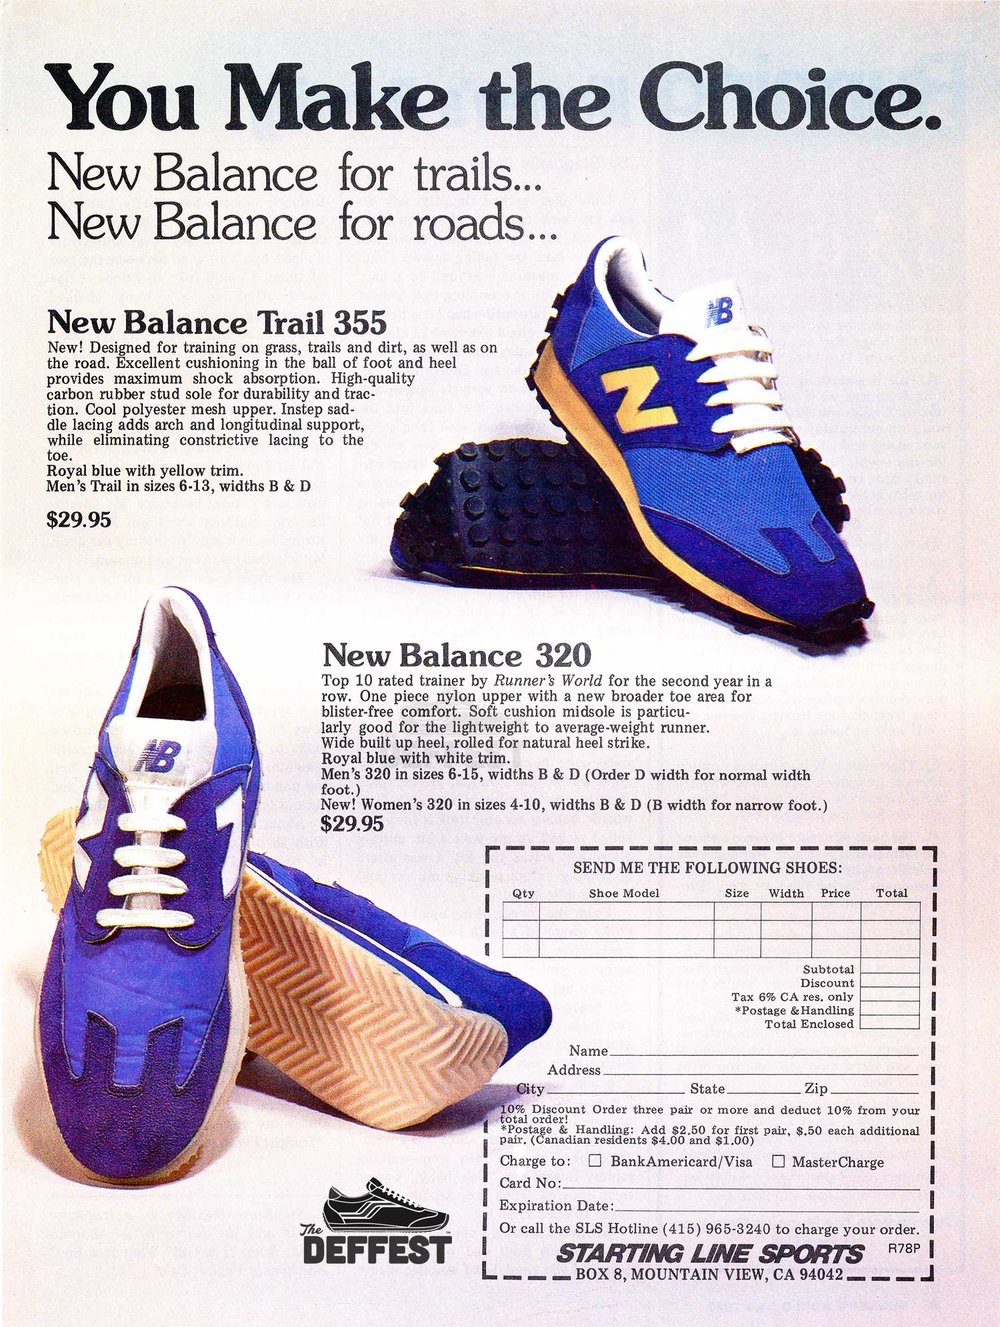 The Deffest®. A vintage and retro sneaker — New 1978 vintage Trail 355 and 320 running shoes